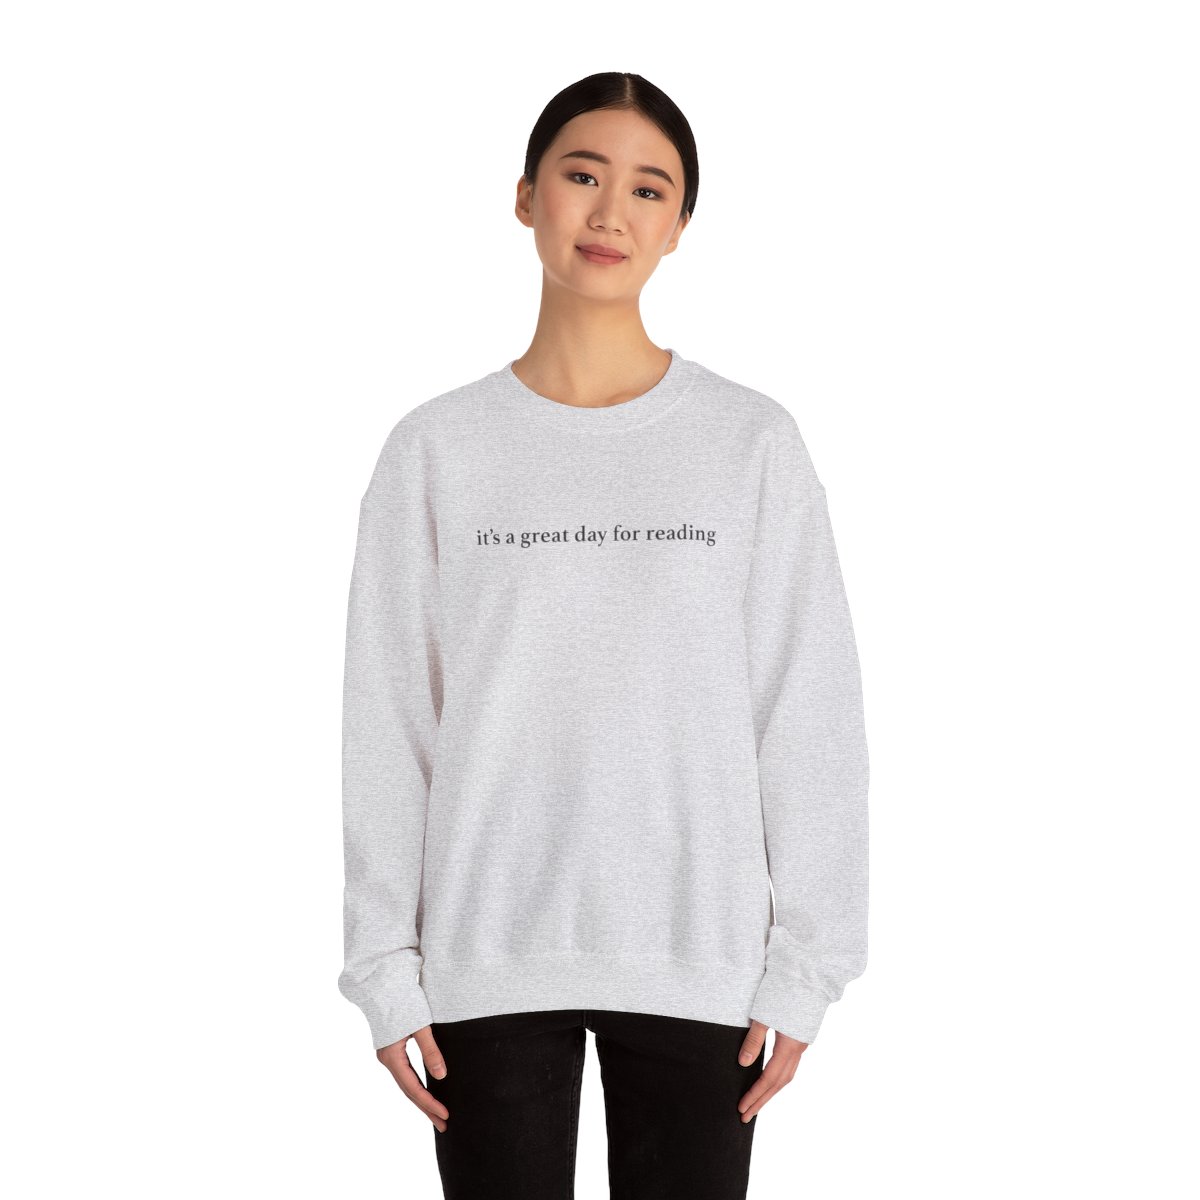 It's a Great Day for Reading Crewneck Sweatshirt for Readers, BookTokers, Book Influencers, Bookstagrammers product thumbnail image